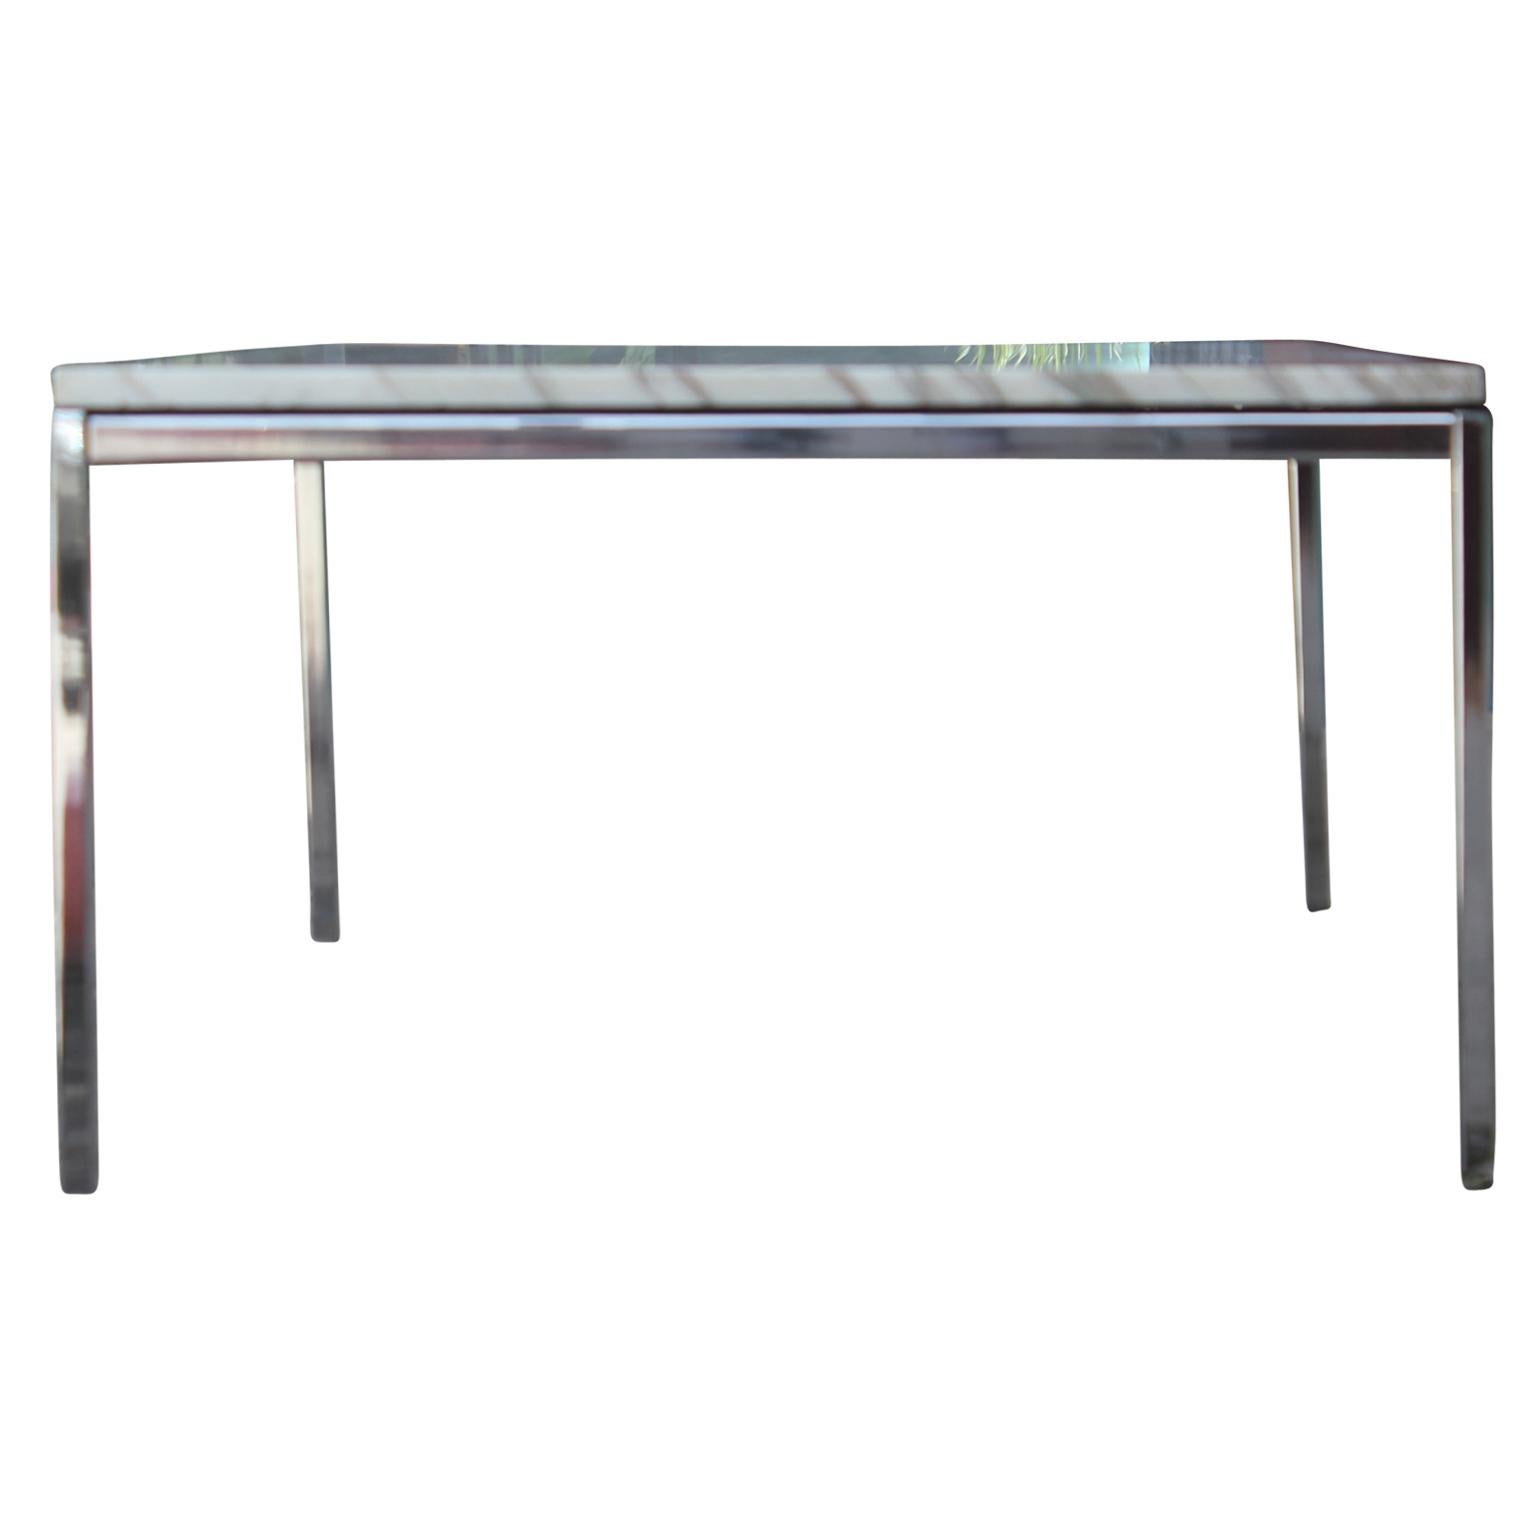 Mid-20th Century Modern Knoll Chrome and Marble Top Rectangular Coffee Table